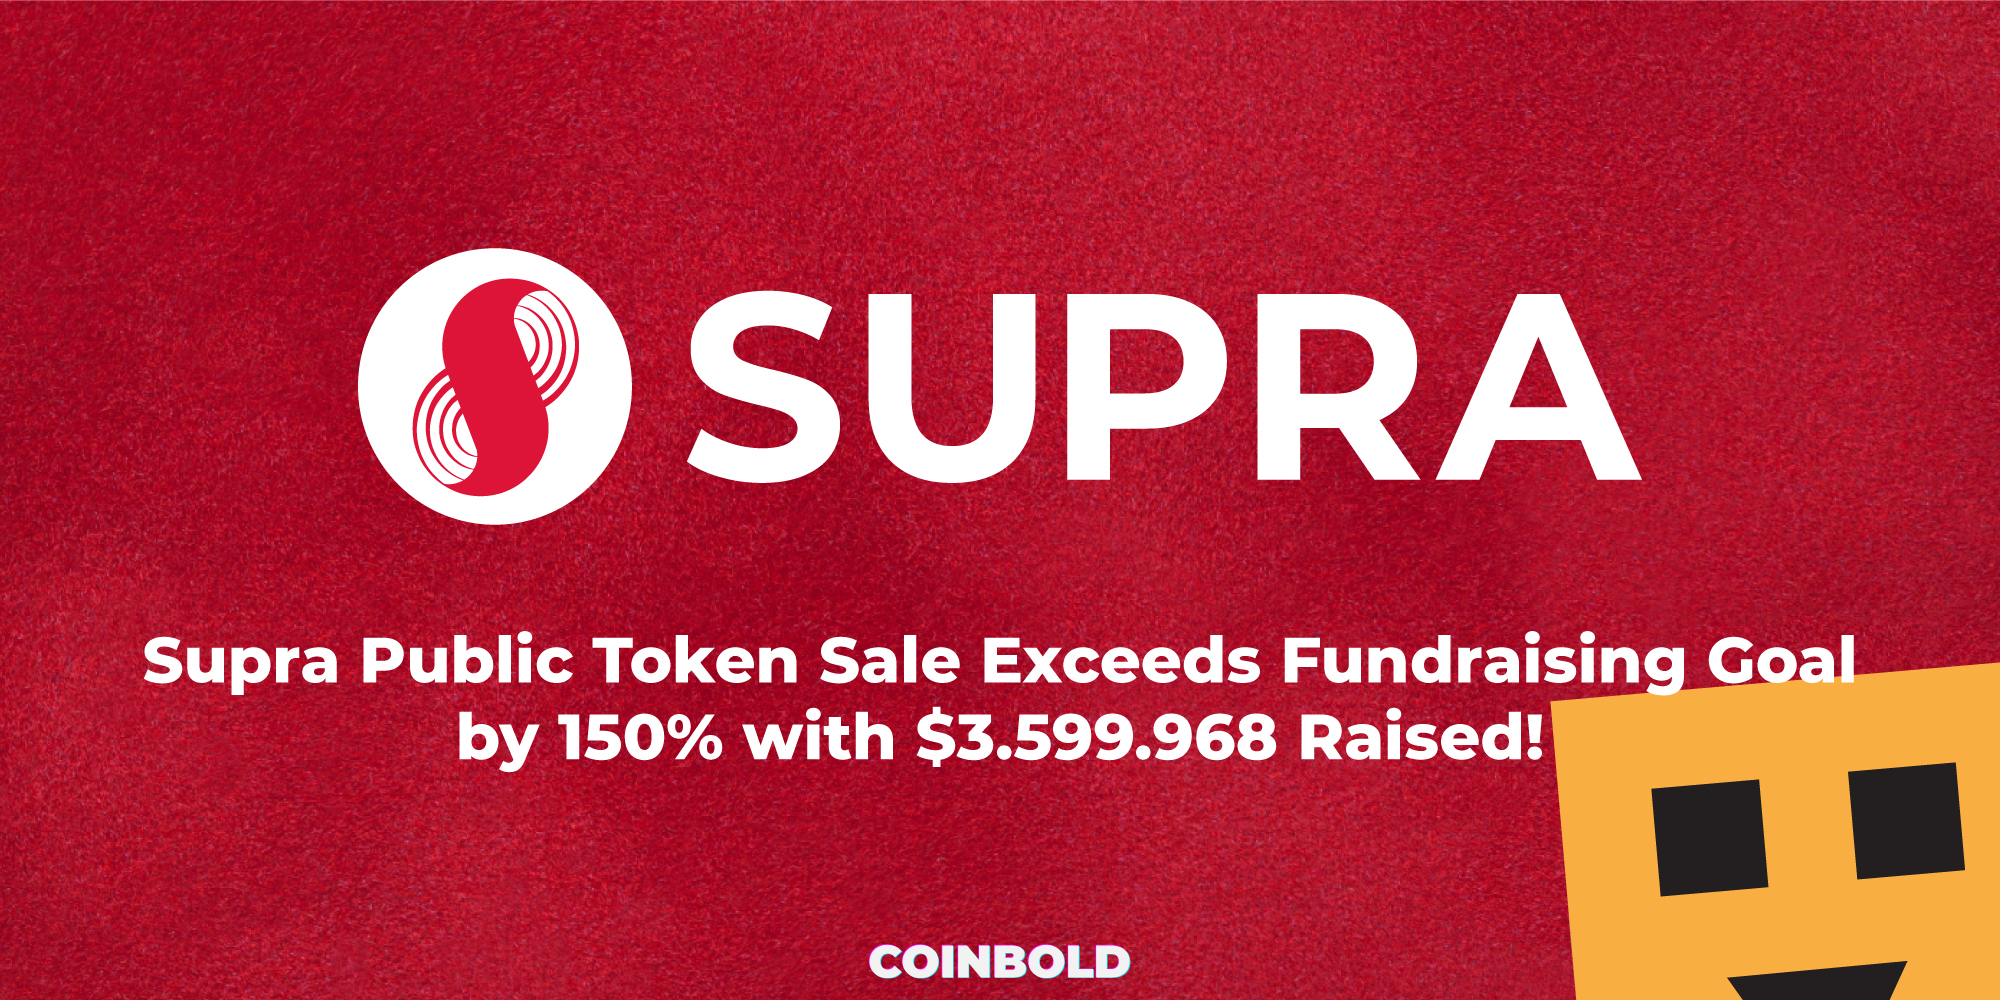 Supra Public Token Sale Exceeds Fundraising Goal by 150% with $3.599.968 Raised!